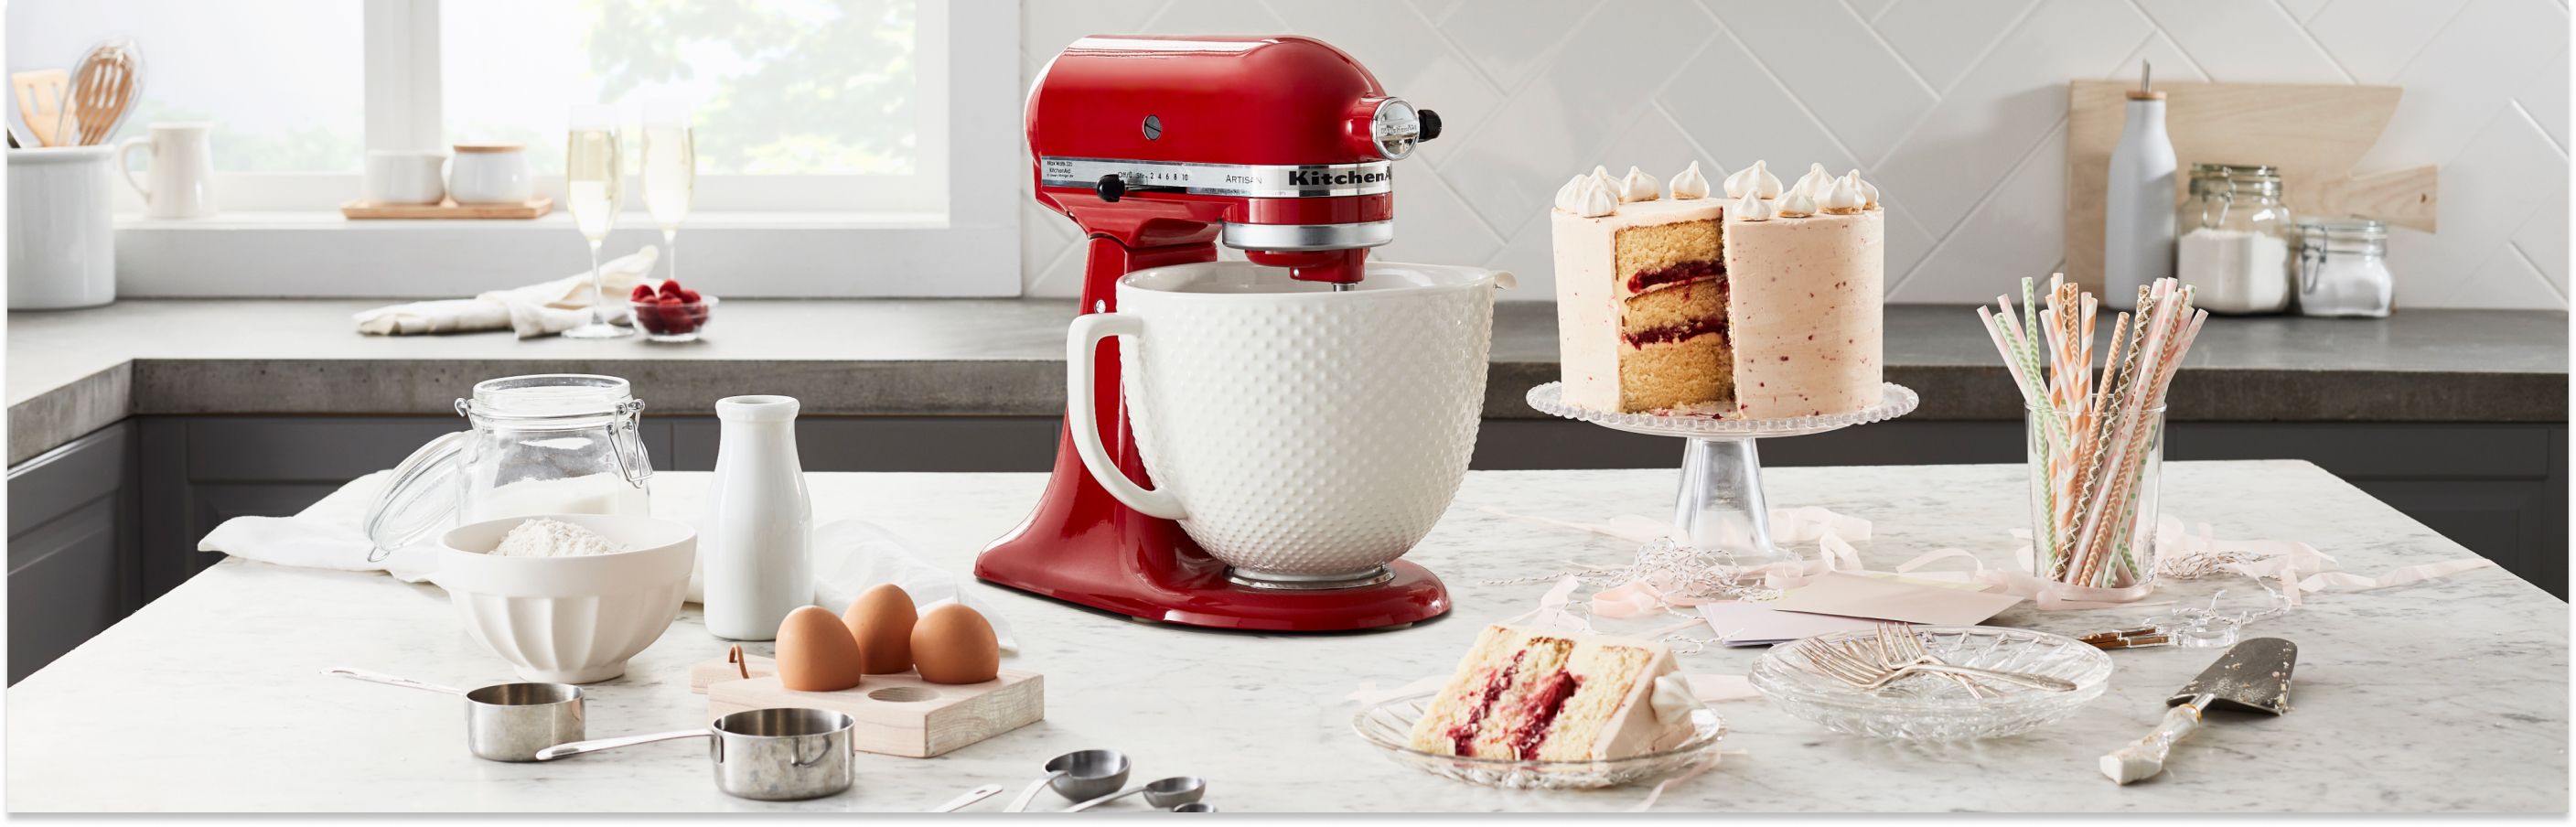 KitchenAid® stand mixer surrounded by layer cake and ingredients for buttercream frosting